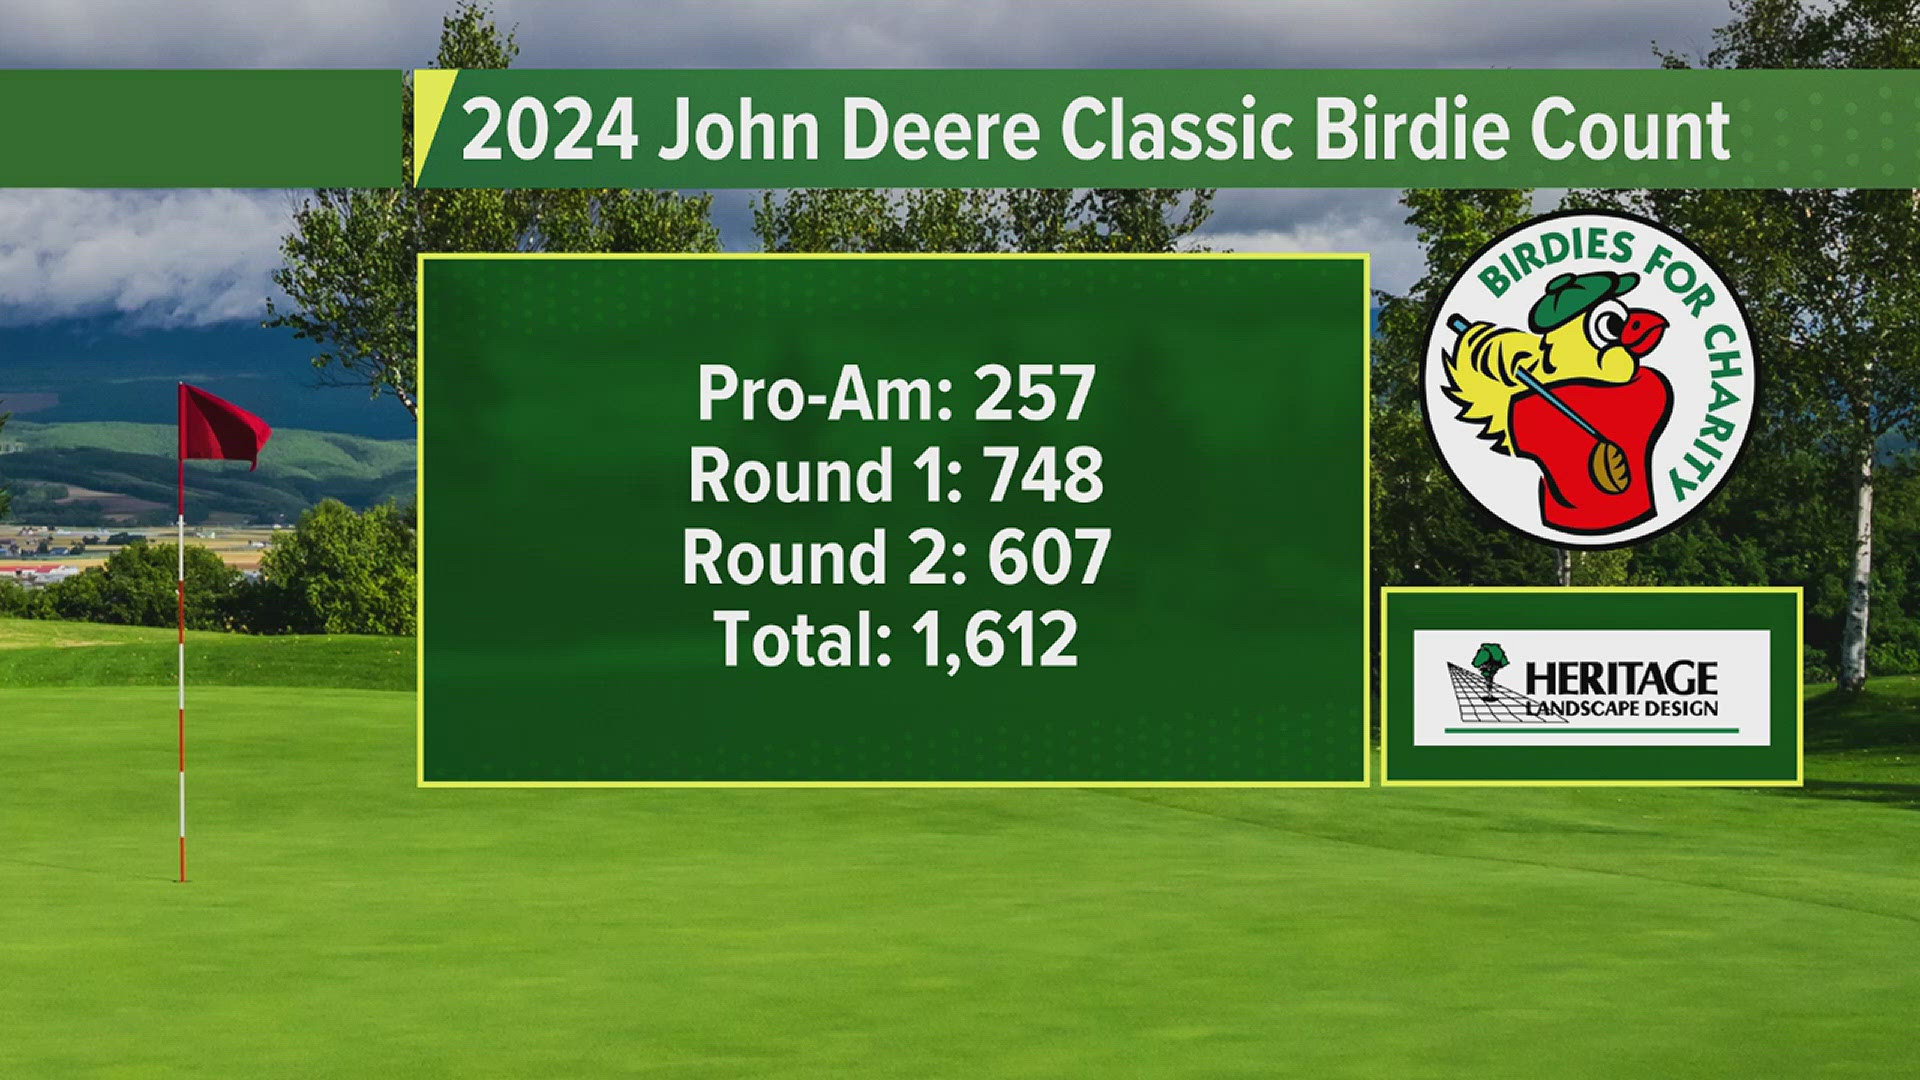 We're up to 1,612 birdies at the end of the second day of competition.